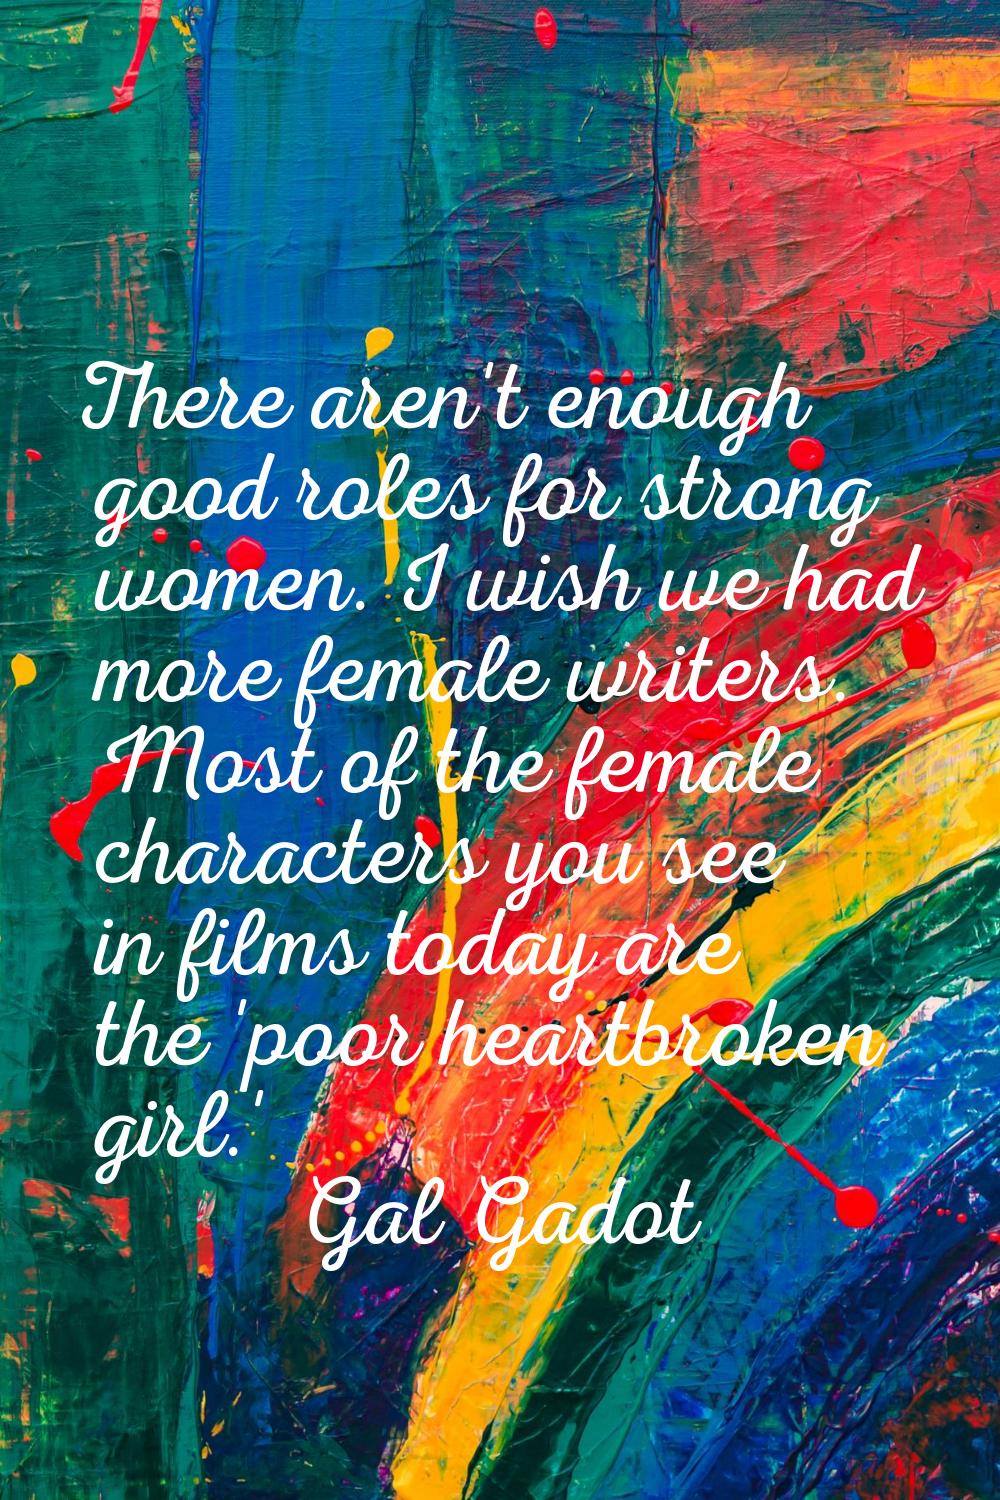 There aren't enough good roles for strong women. I wish we had more female writers. Most of the fem